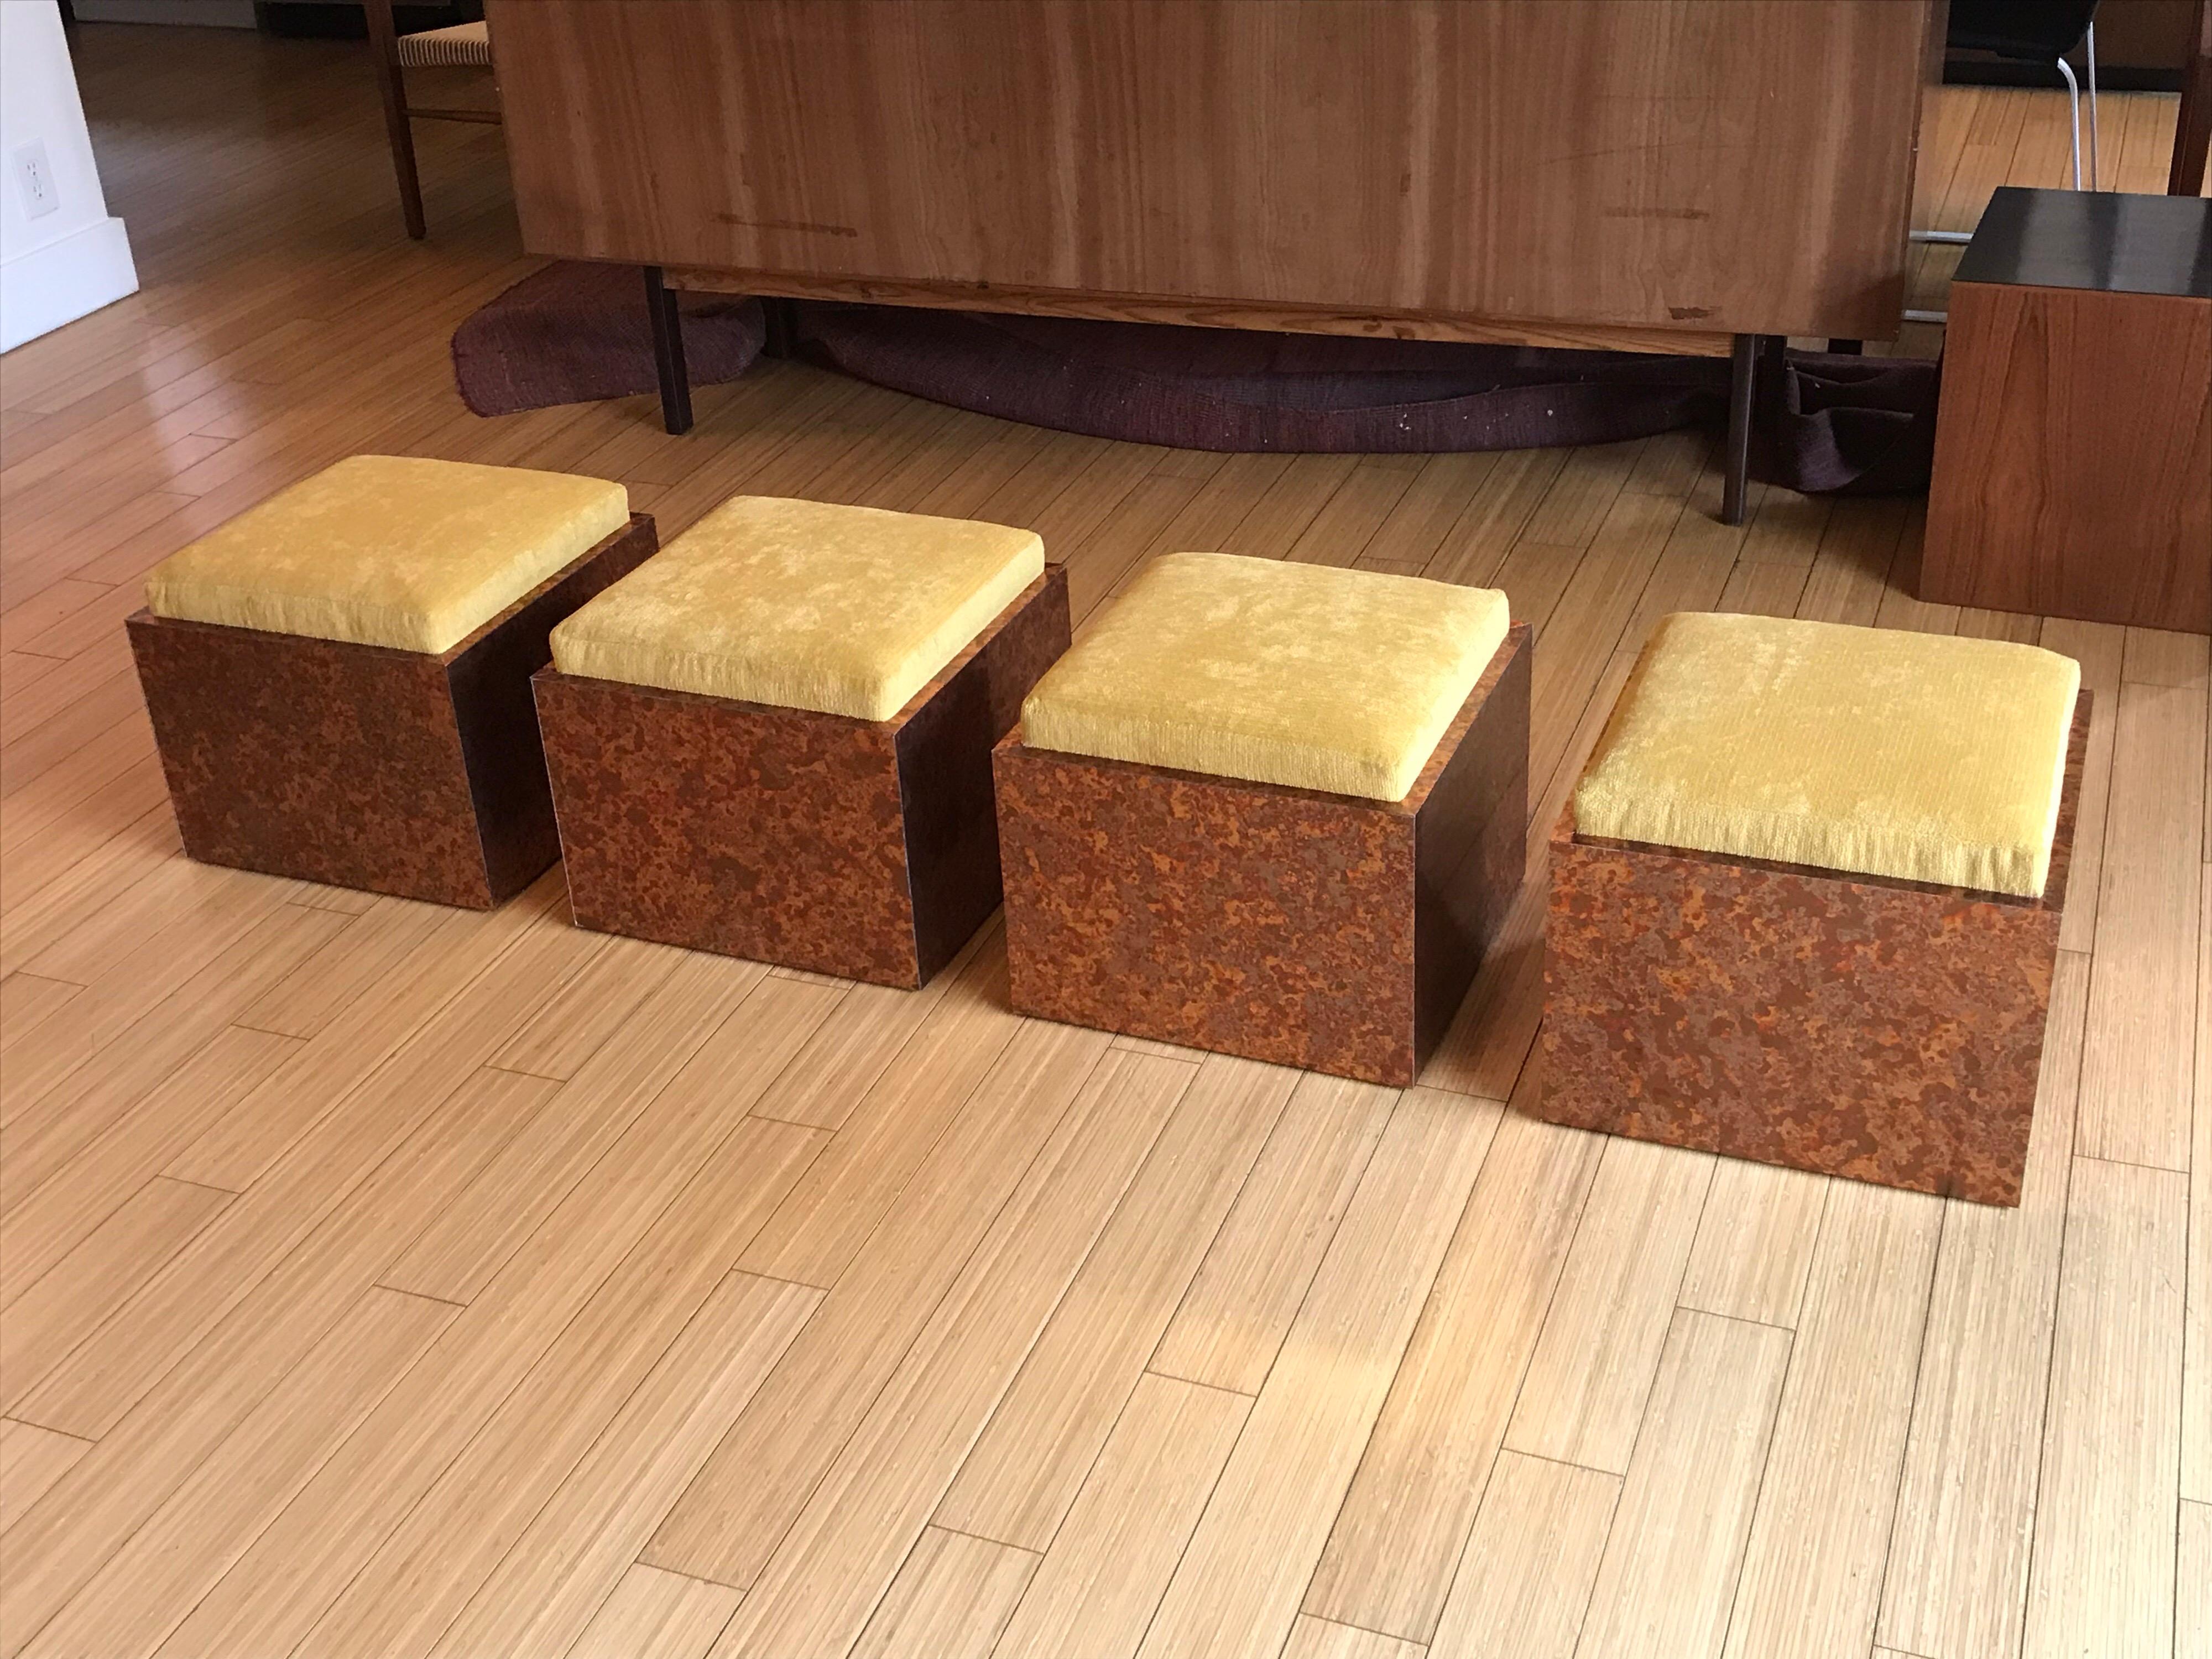 Ultra modern designs.
Simple and timeless form.
Plywood with mottled hue steel veneer with marigold upholstery.
Mr. Di Vincente studied at the San Francisco Art Institute. 
He lives and works in Lo Angeles.
Great for any occasion, living room,